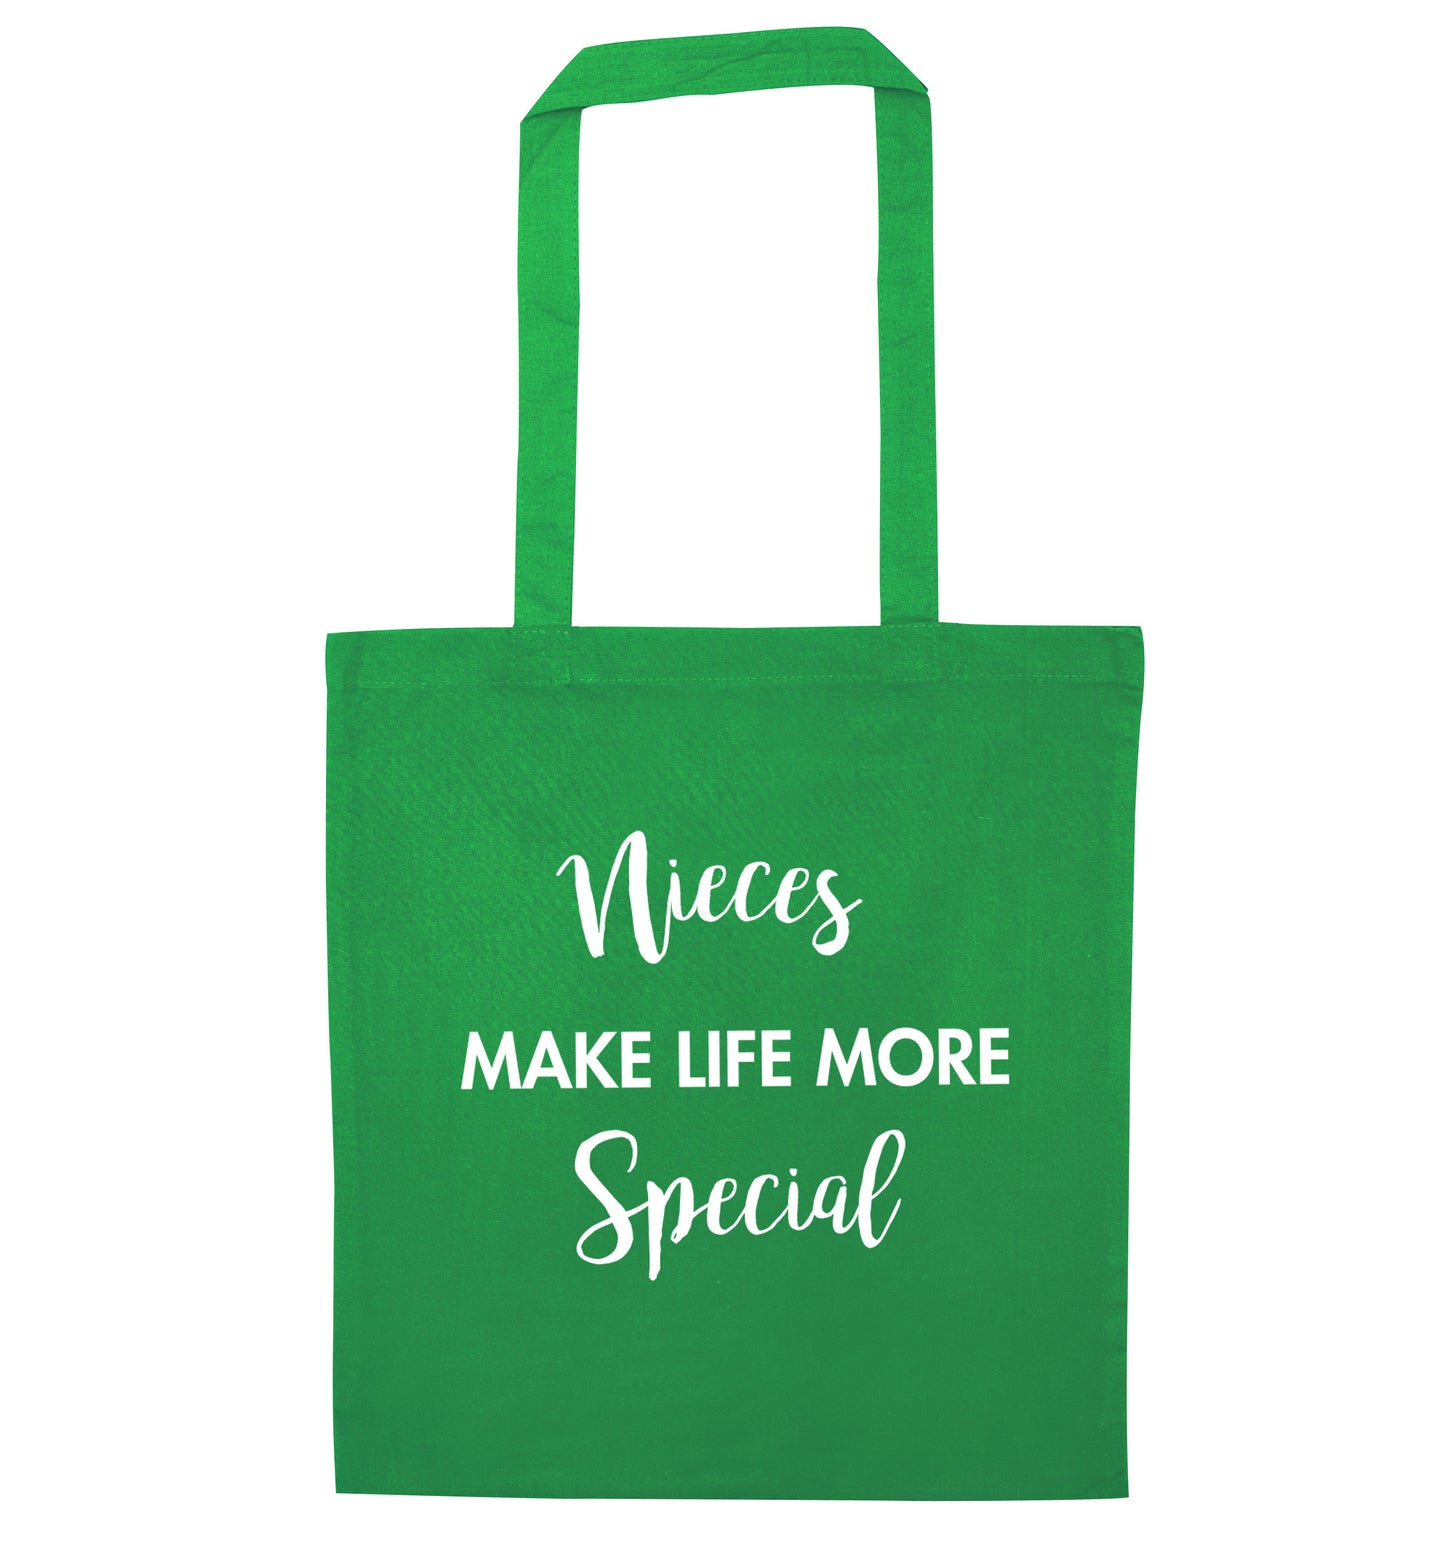 Nieces make life more special green tote bag